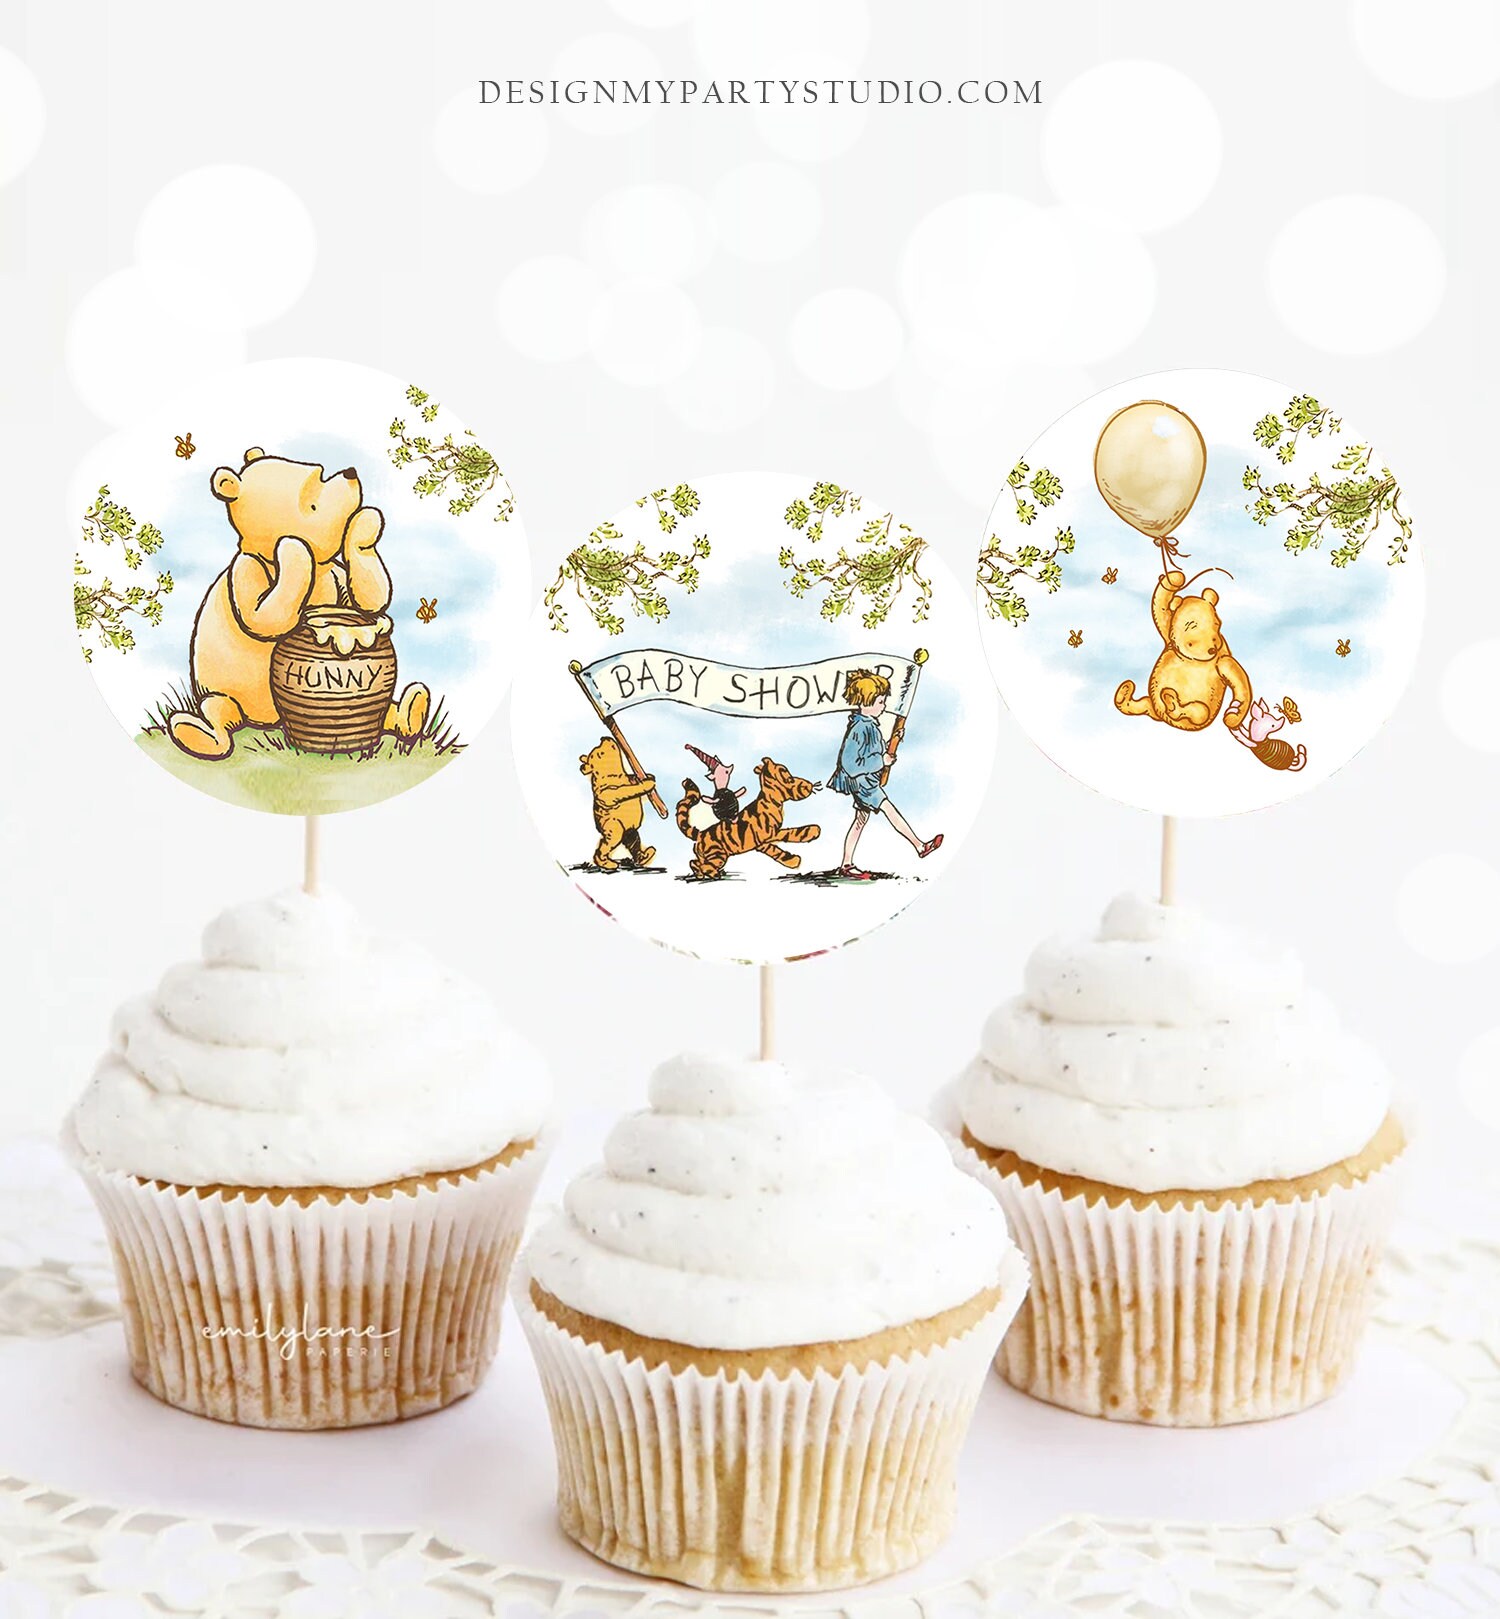 Baby Pooh Classic Winnie the Pooh Vintage Pooh Inspired Cake